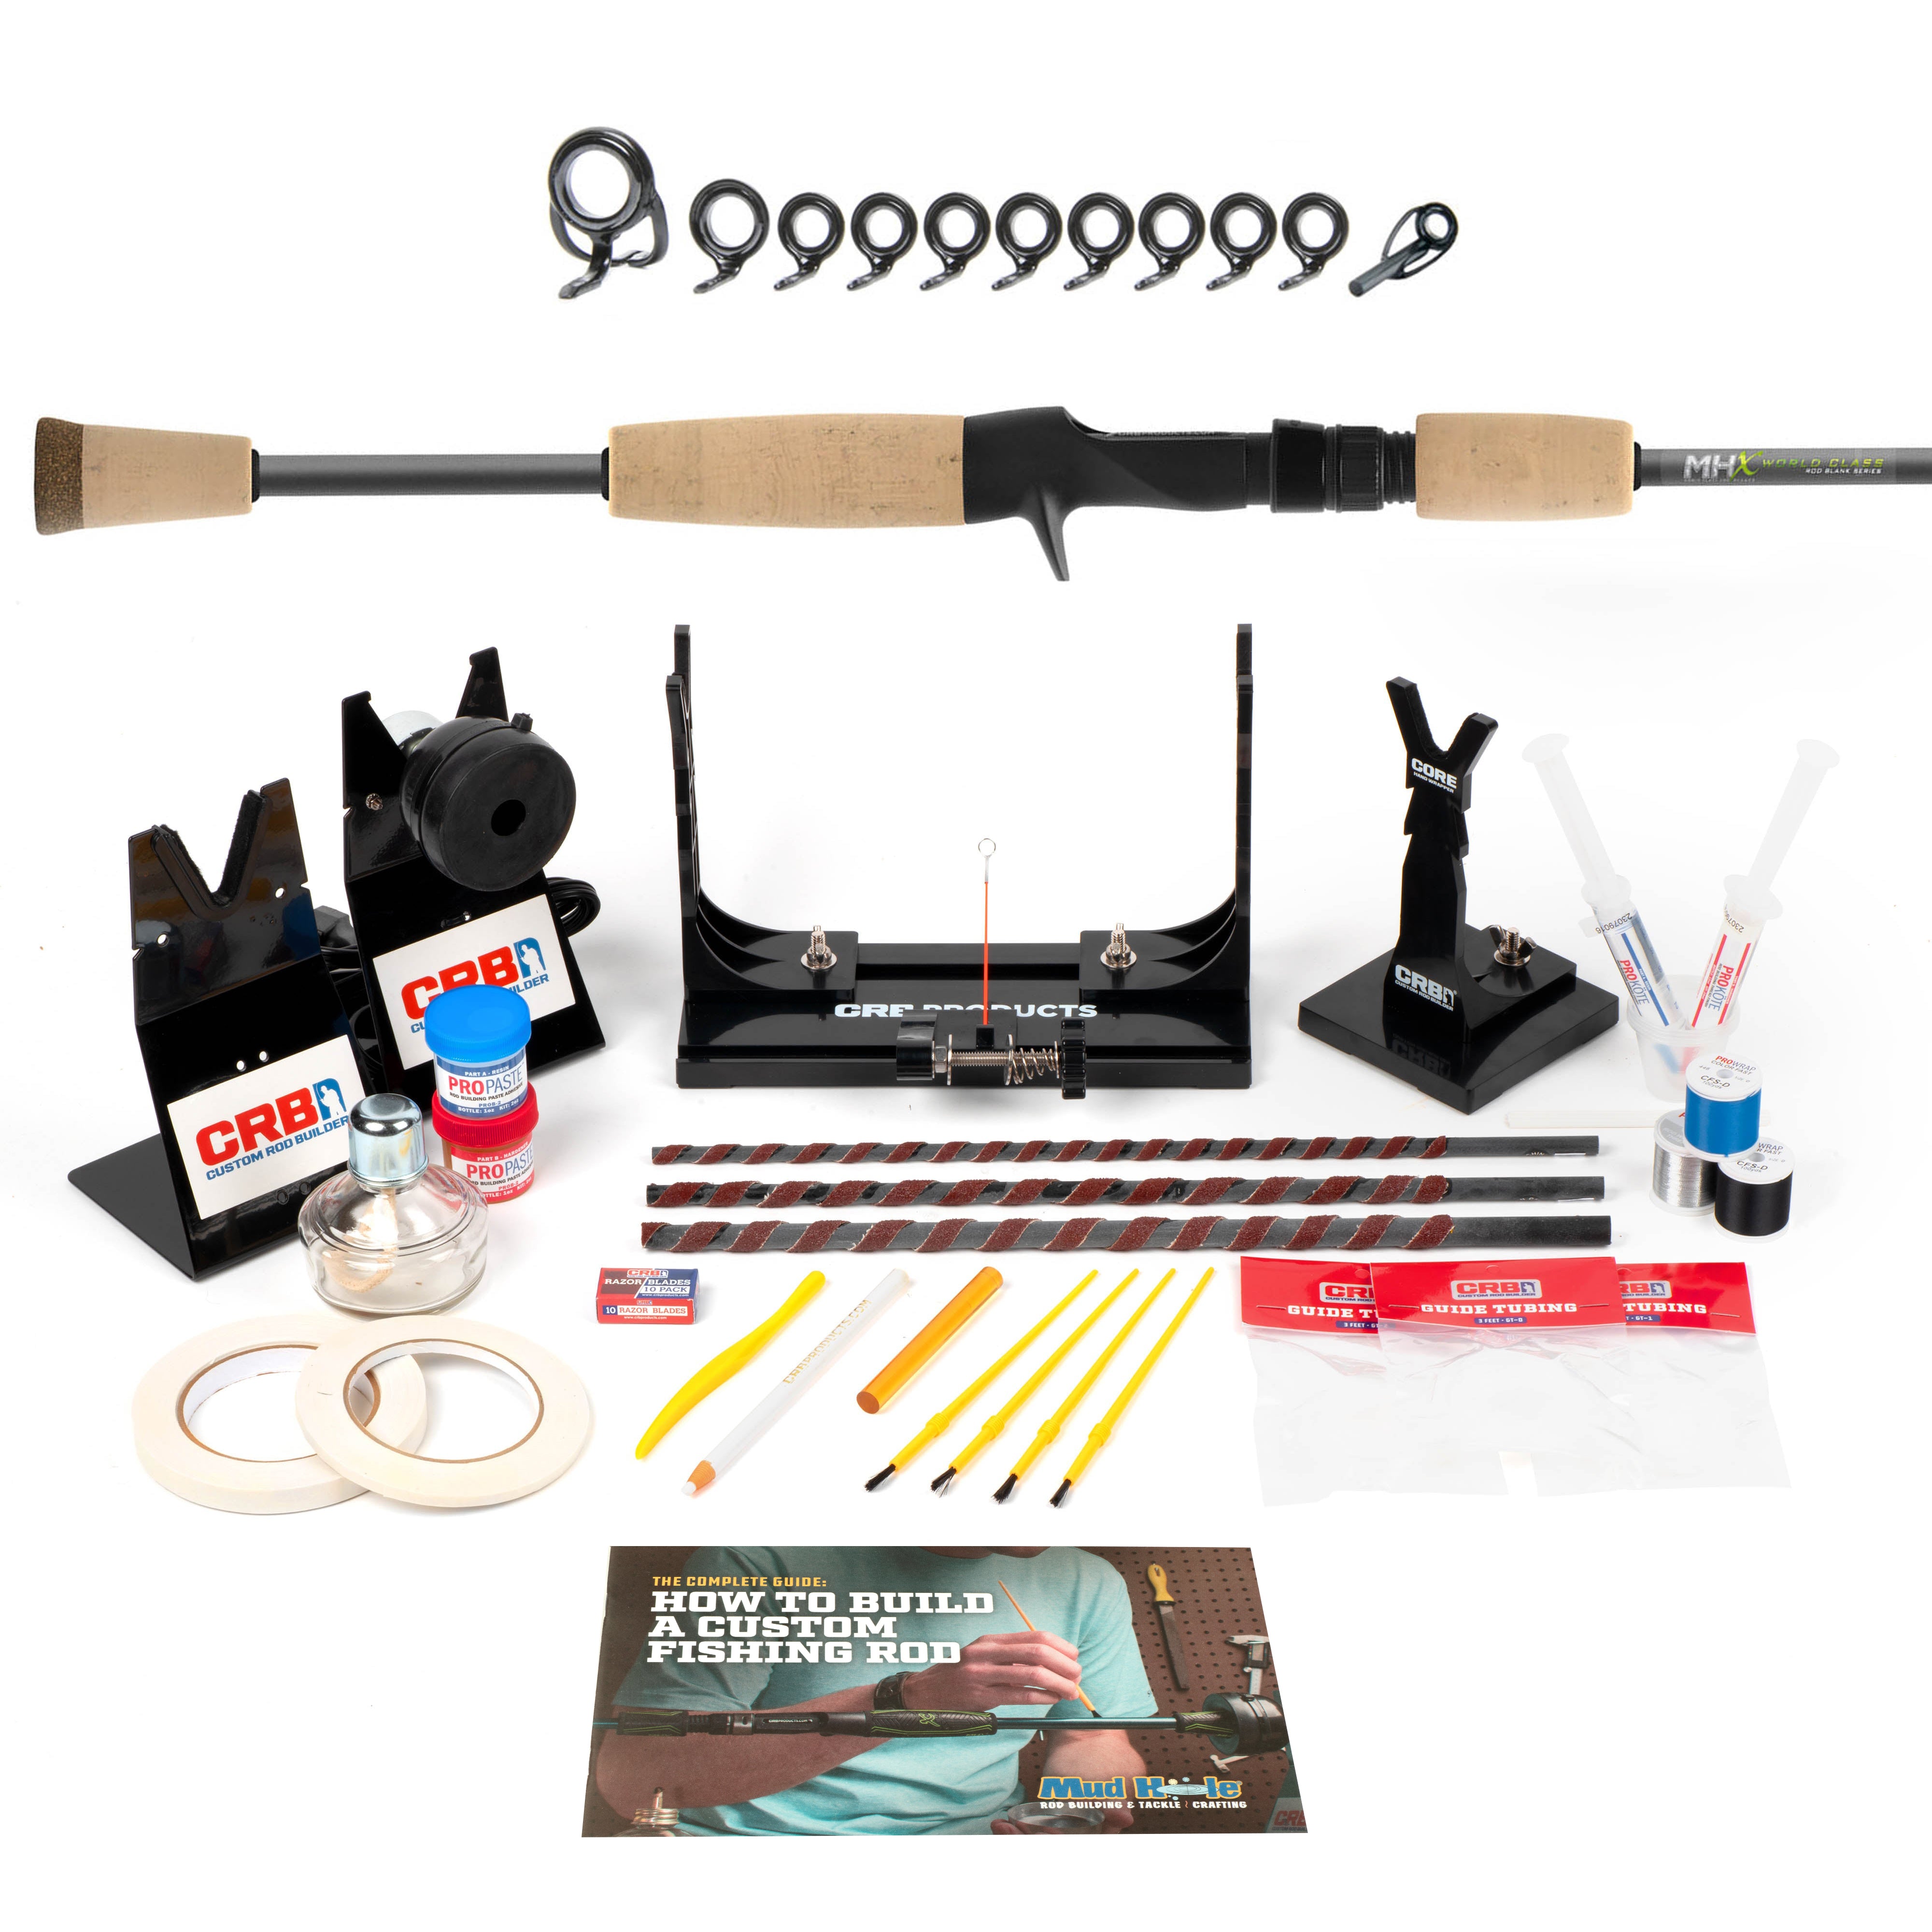 All In One Rod Building Kit – MB843 7' Med-Heavy Casting